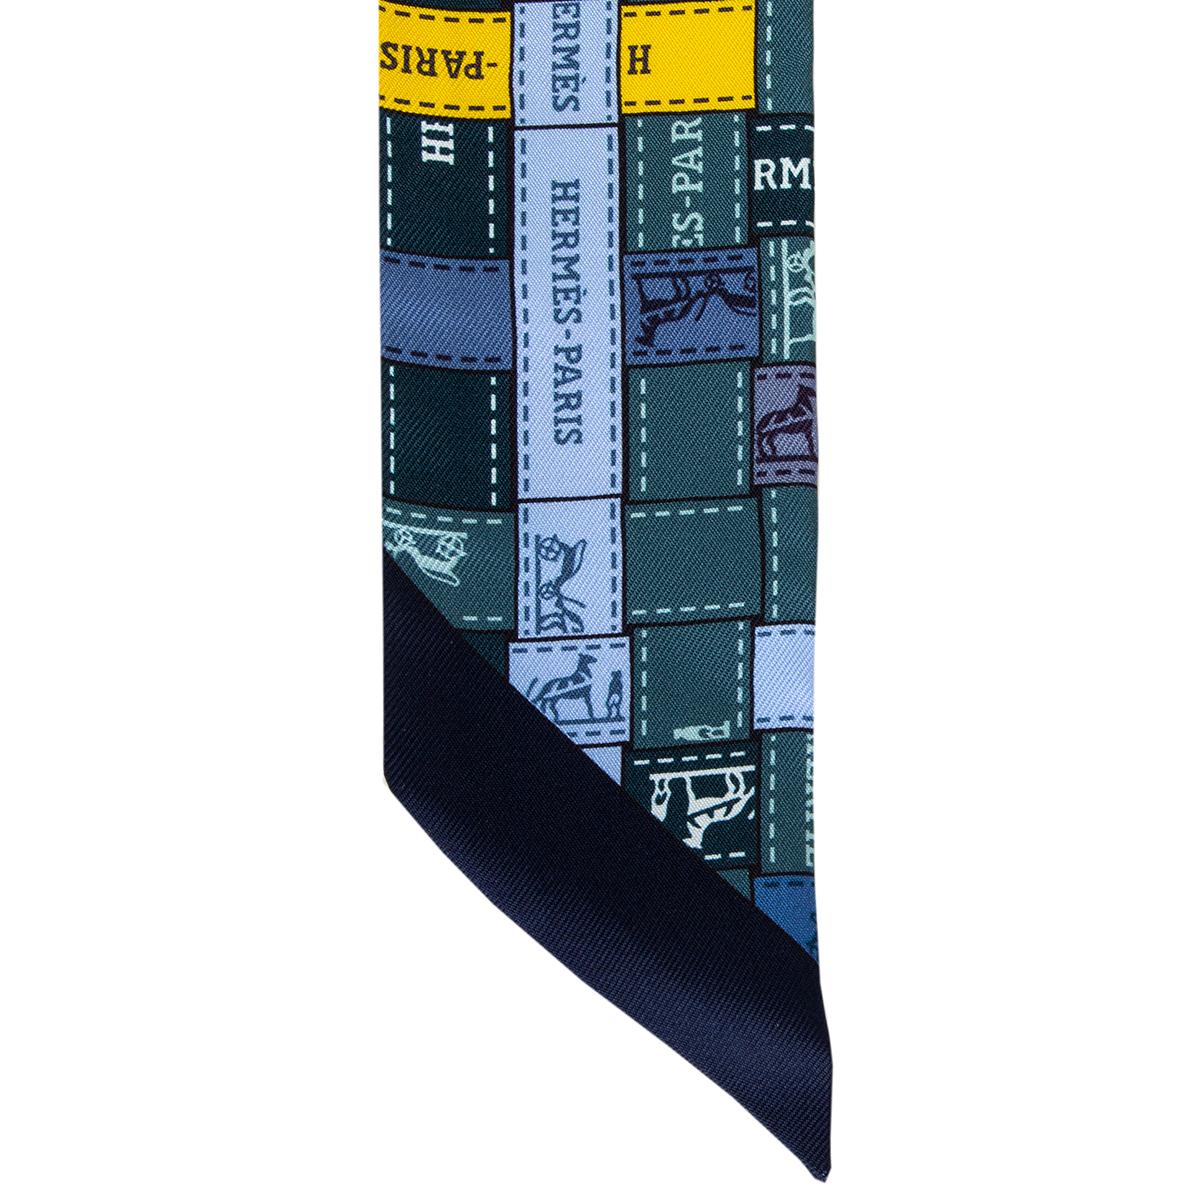 Hernes 'Bolduc au Carre Twilly' scarf in petrol blue silk twil (100%) with details in teal, periwinkle and dark blue. Brand new with tag.

Width 5cm (2in)
Length 86cm (33.5in)
